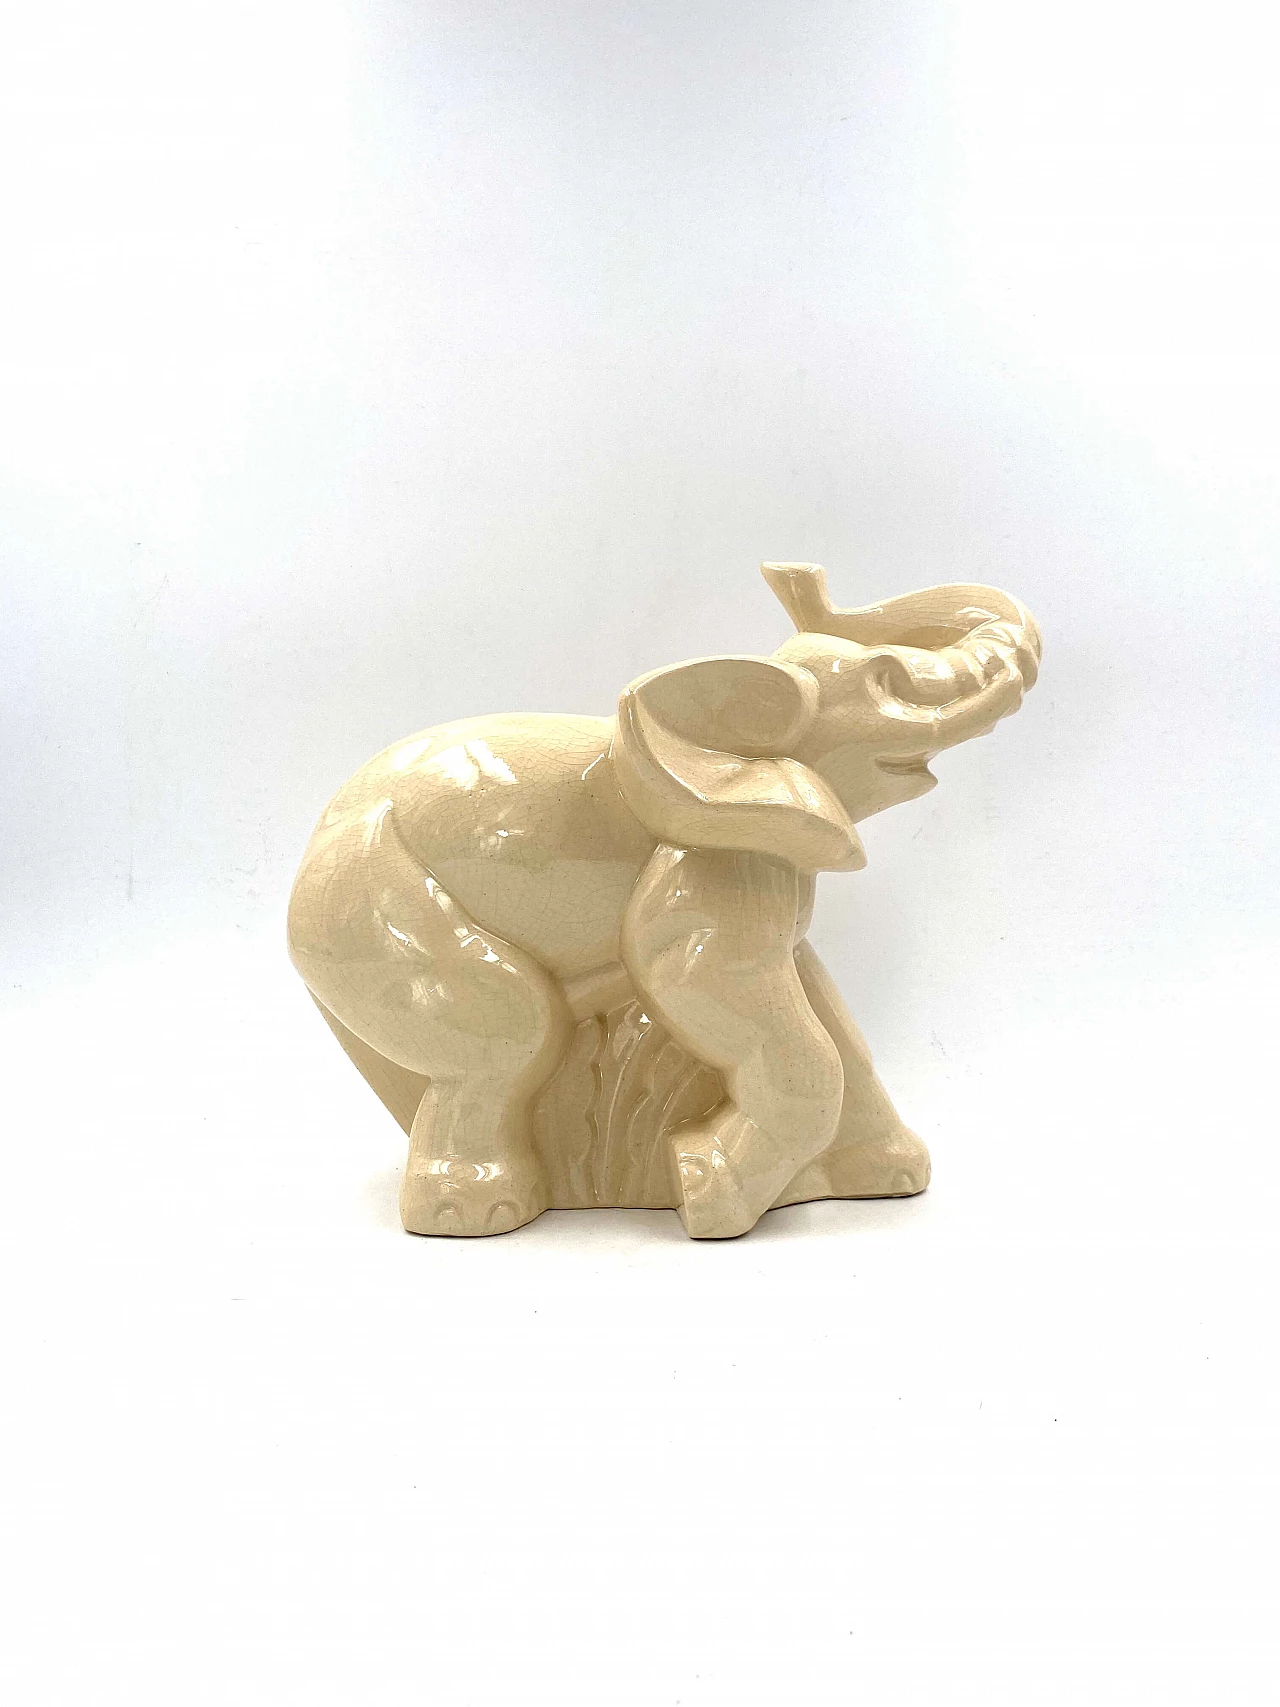 Sculpture of an elephant in craquelé glazed terracotta by Fontinelle, 1940s 1329671